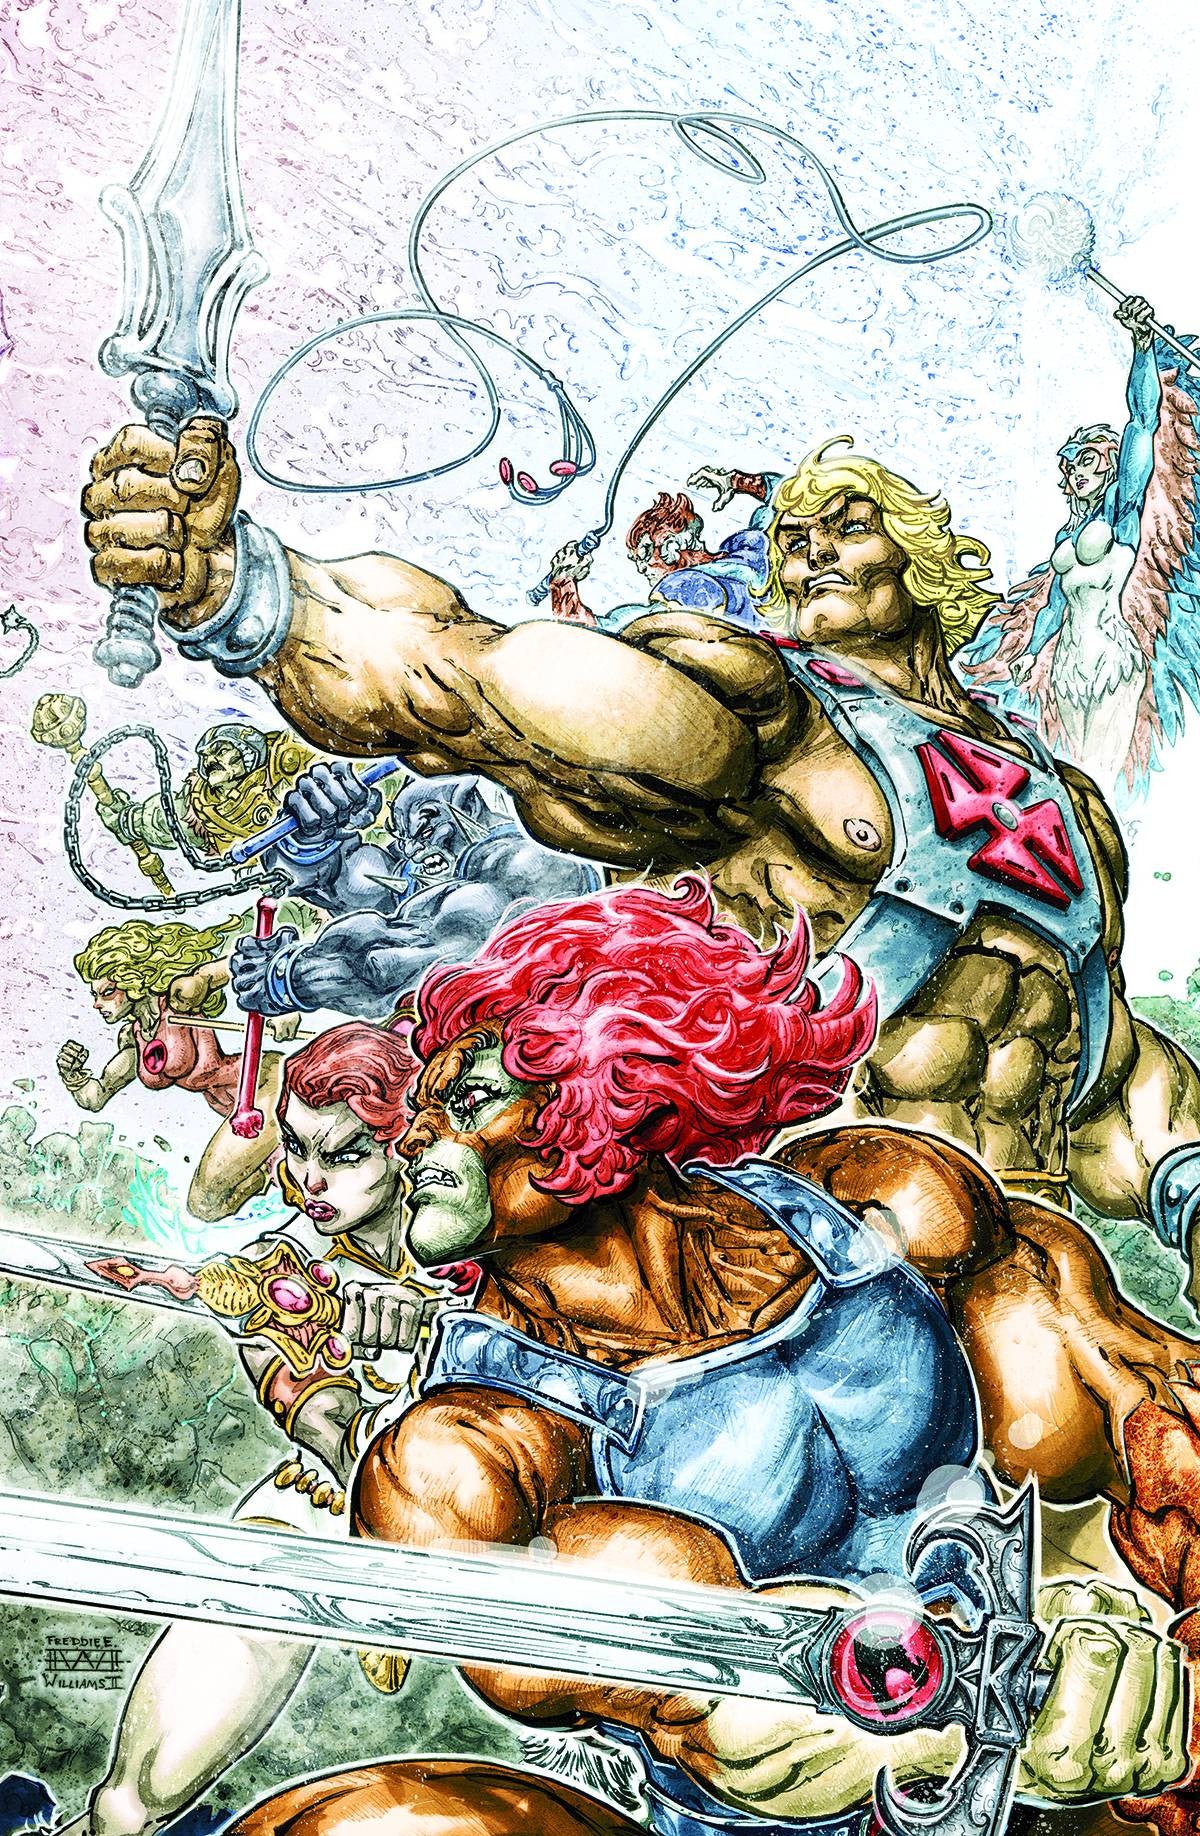 HE MAN THUNDERCATS #1 (OF 6) COVER